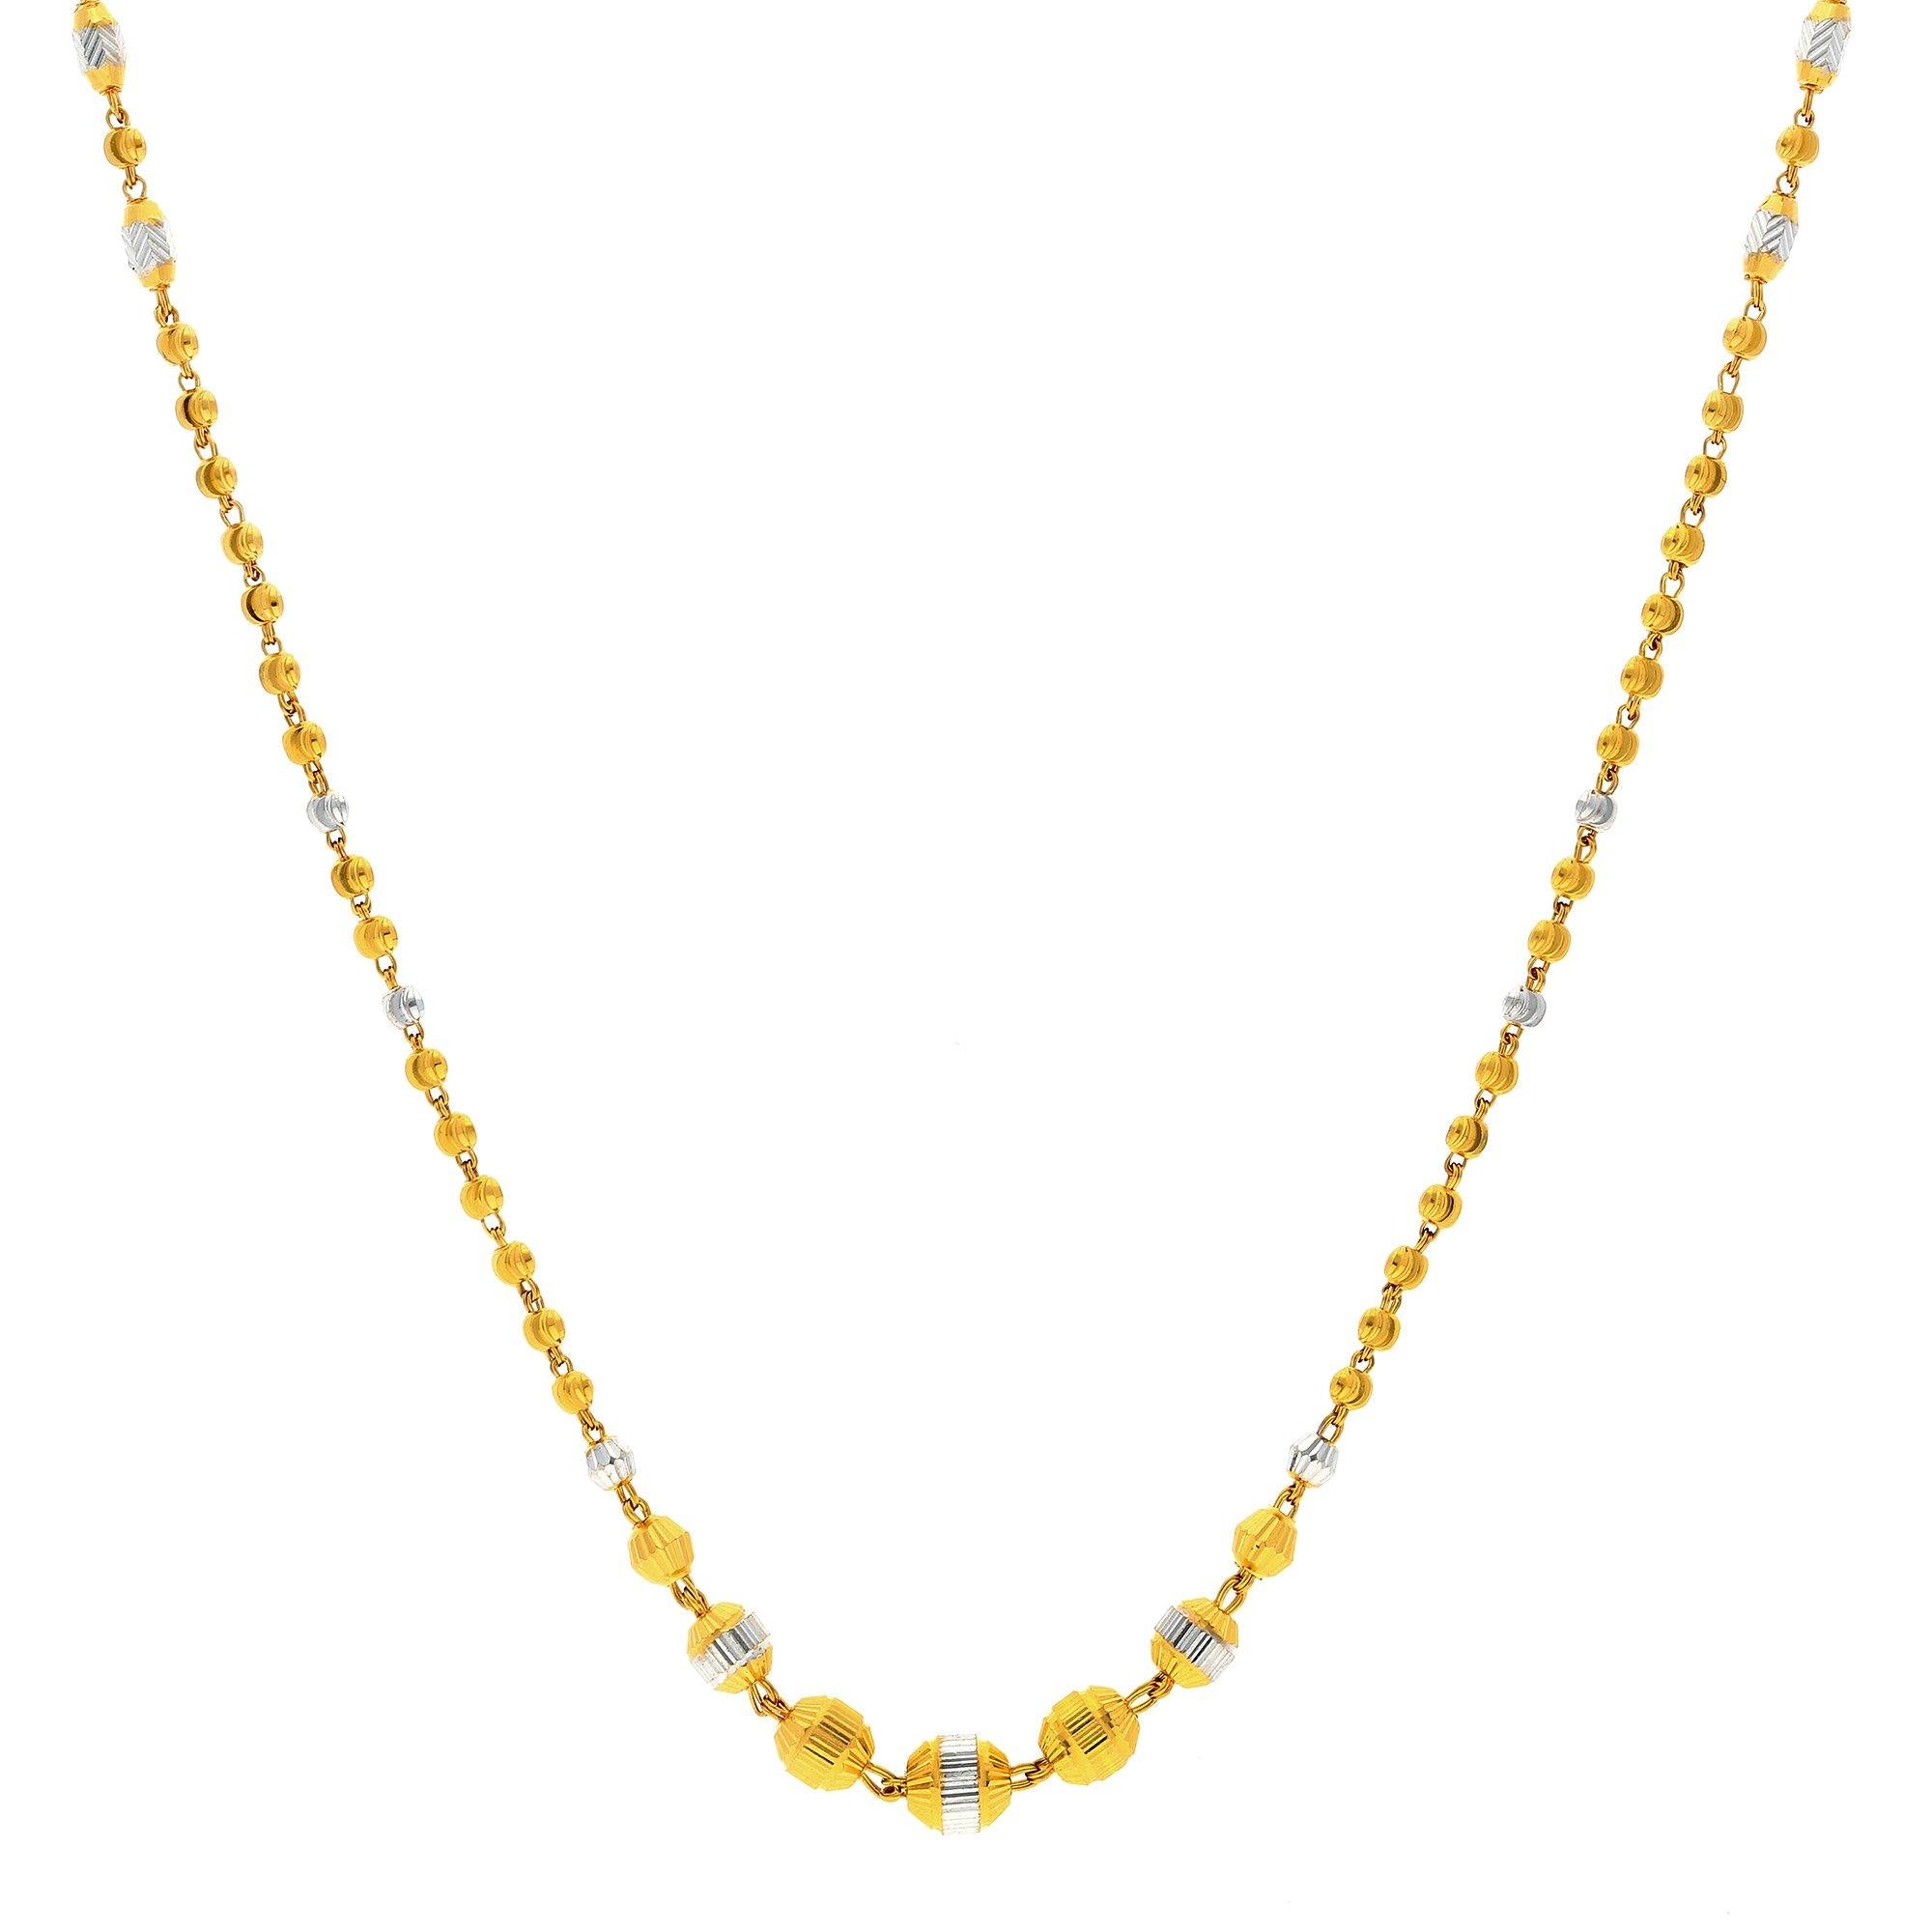 Bespoke Jwalanti Tushi Kyra Gold Necklace for women under 80K - Candere by  Kalyan Jewellers